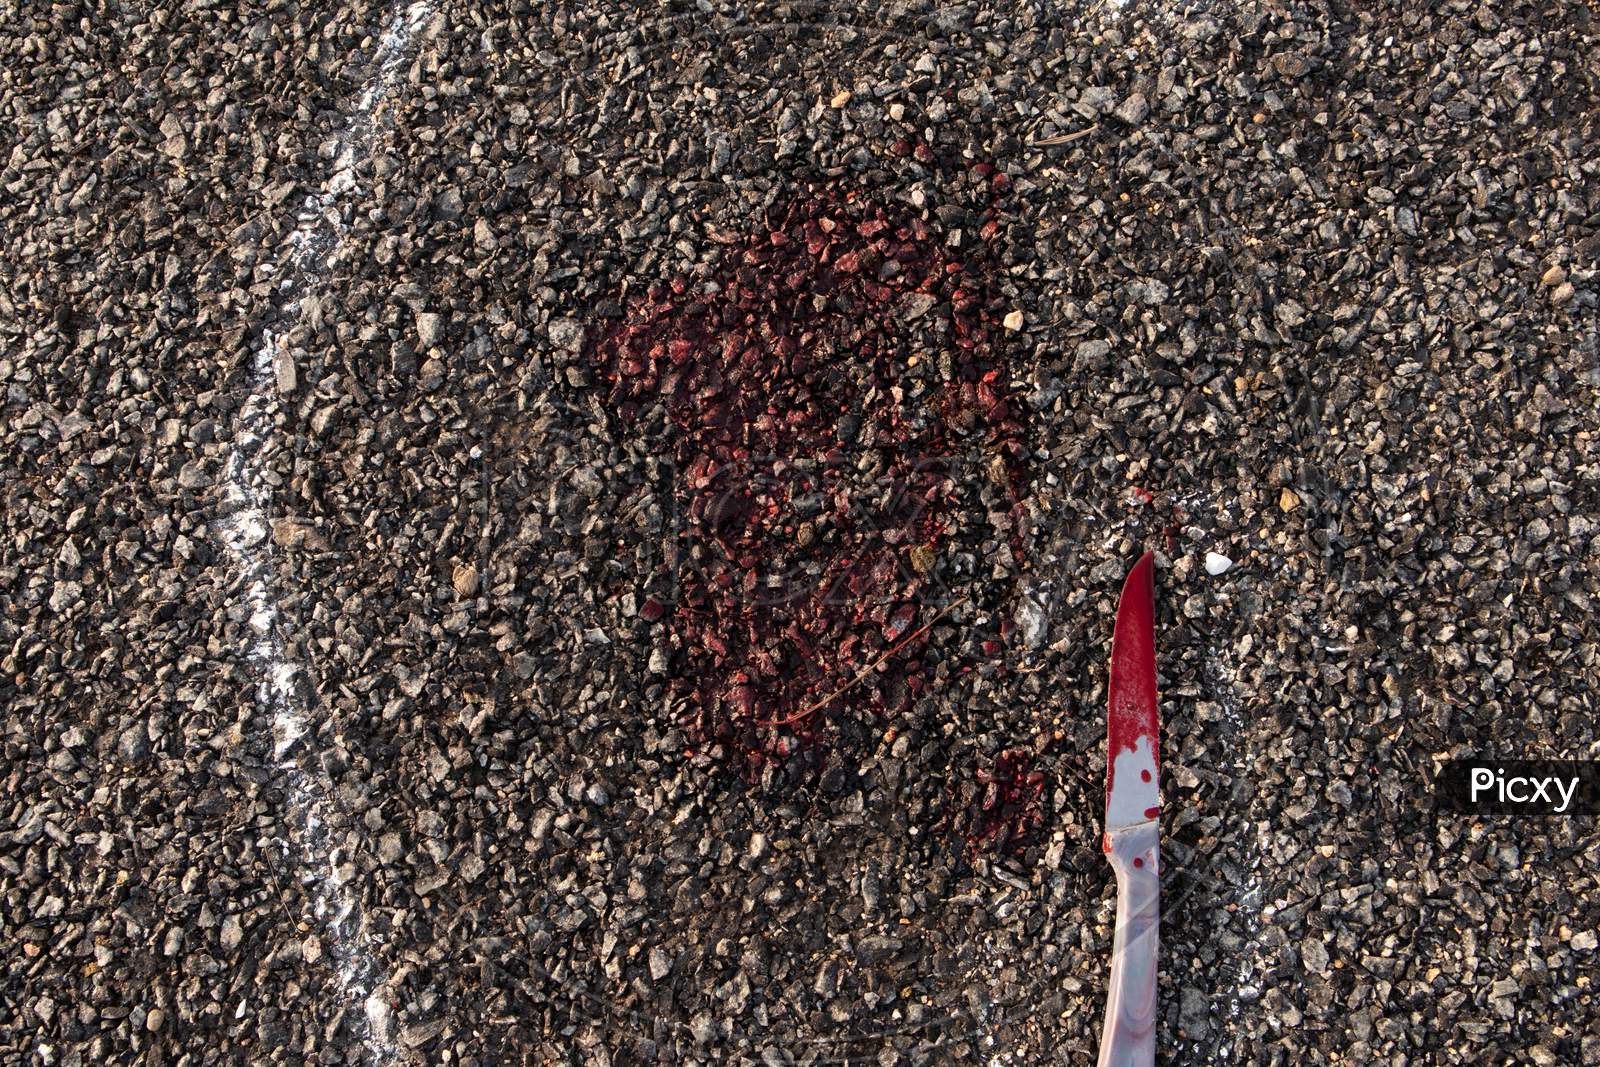 Close Up Of Crime Scene Chalk Outline Of Victim Dead Body On Road With Bloody Knife And Blood.